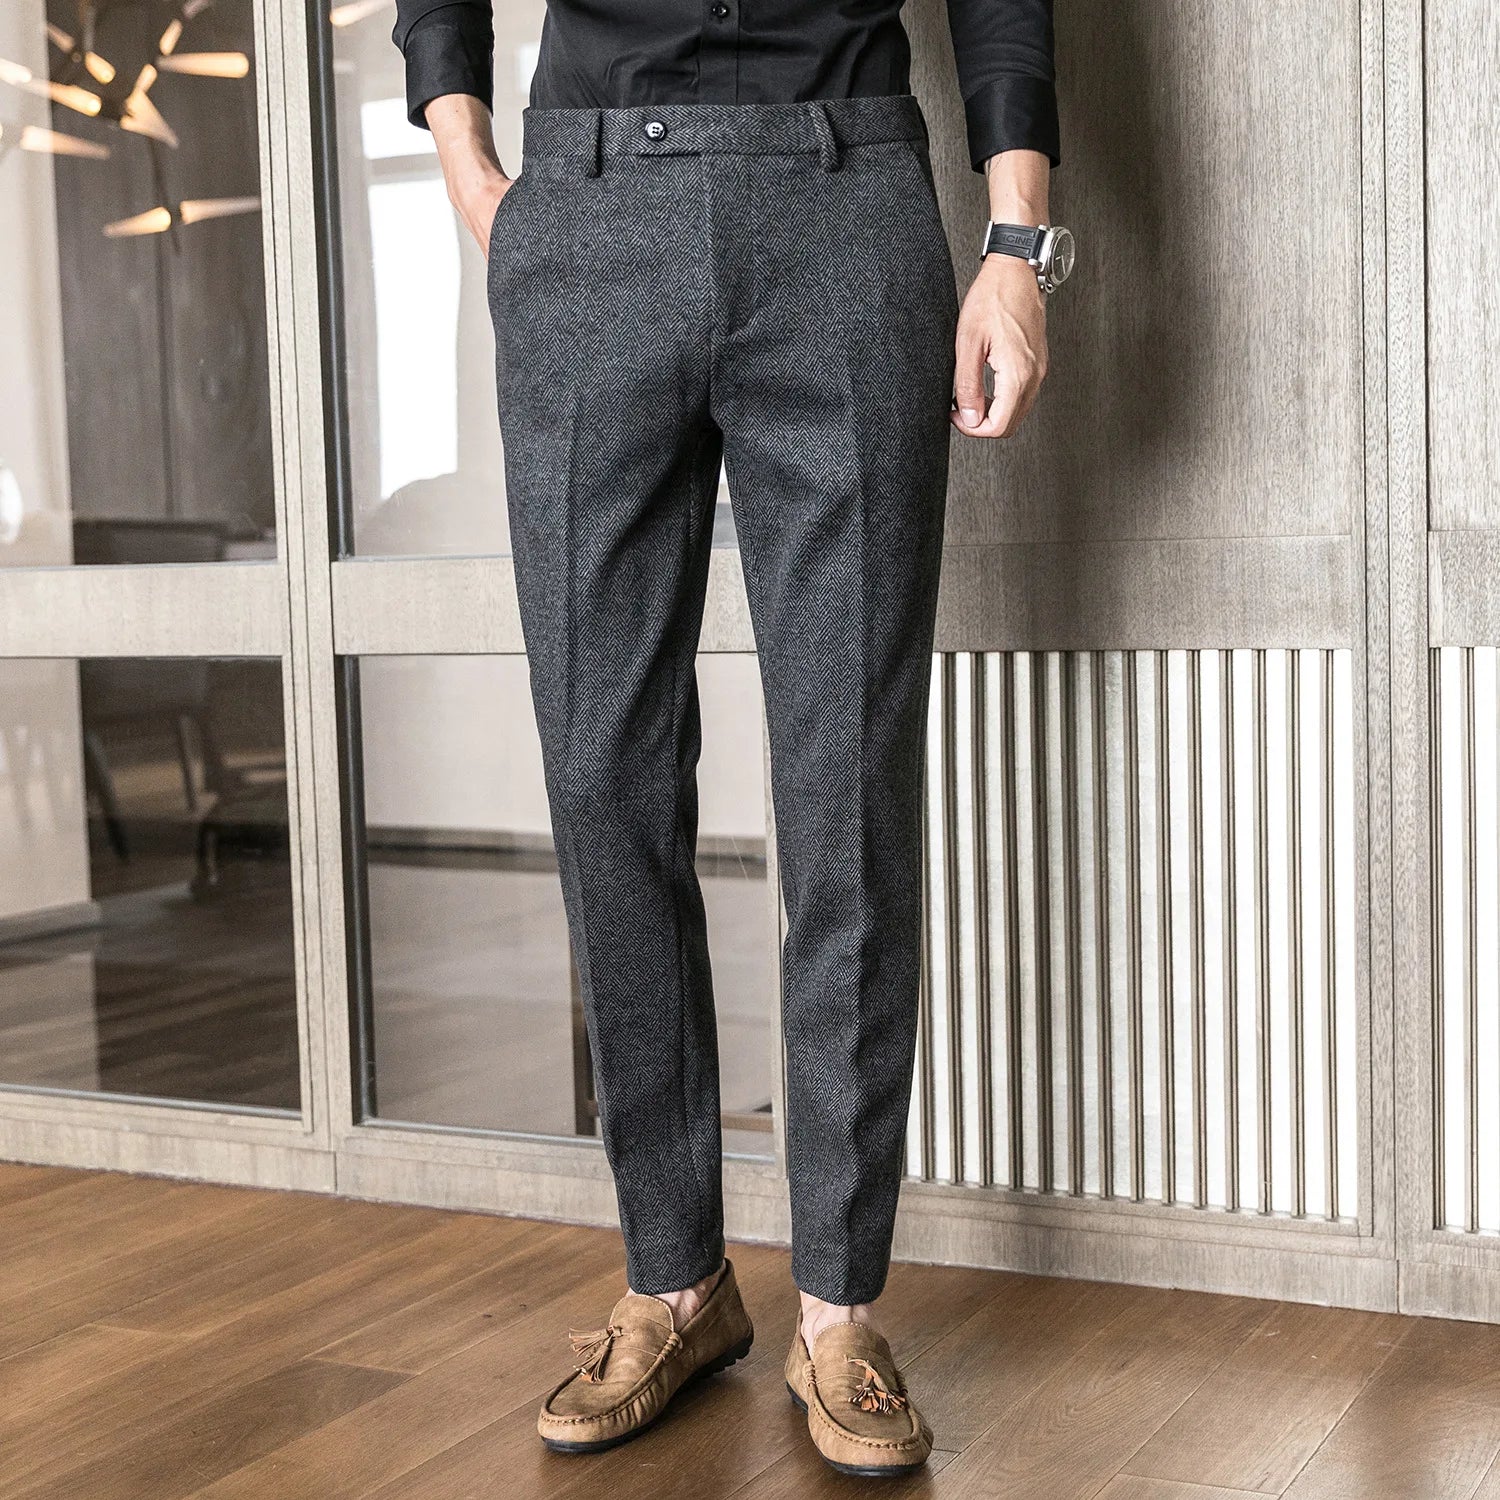 Woolen Dress Trousers Men Thicken Business Formal Office Trousers Wool Mens Suit Pant  New voguable